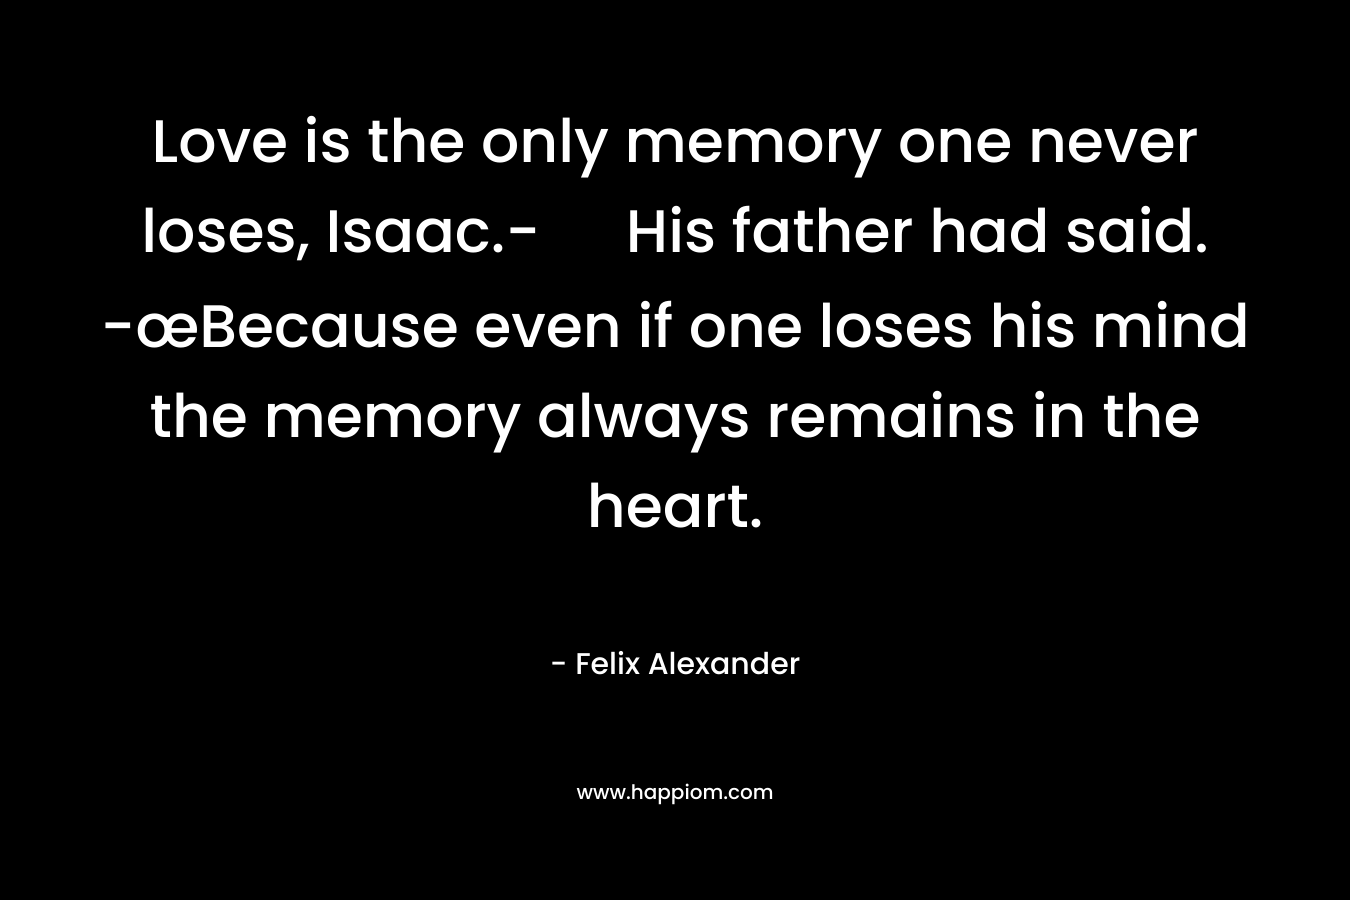 Love is the only memory one never loses, Isaac.- His father had said. -œBecause even if one loses his mind the memory always remains in the heart. – Felix Alexander